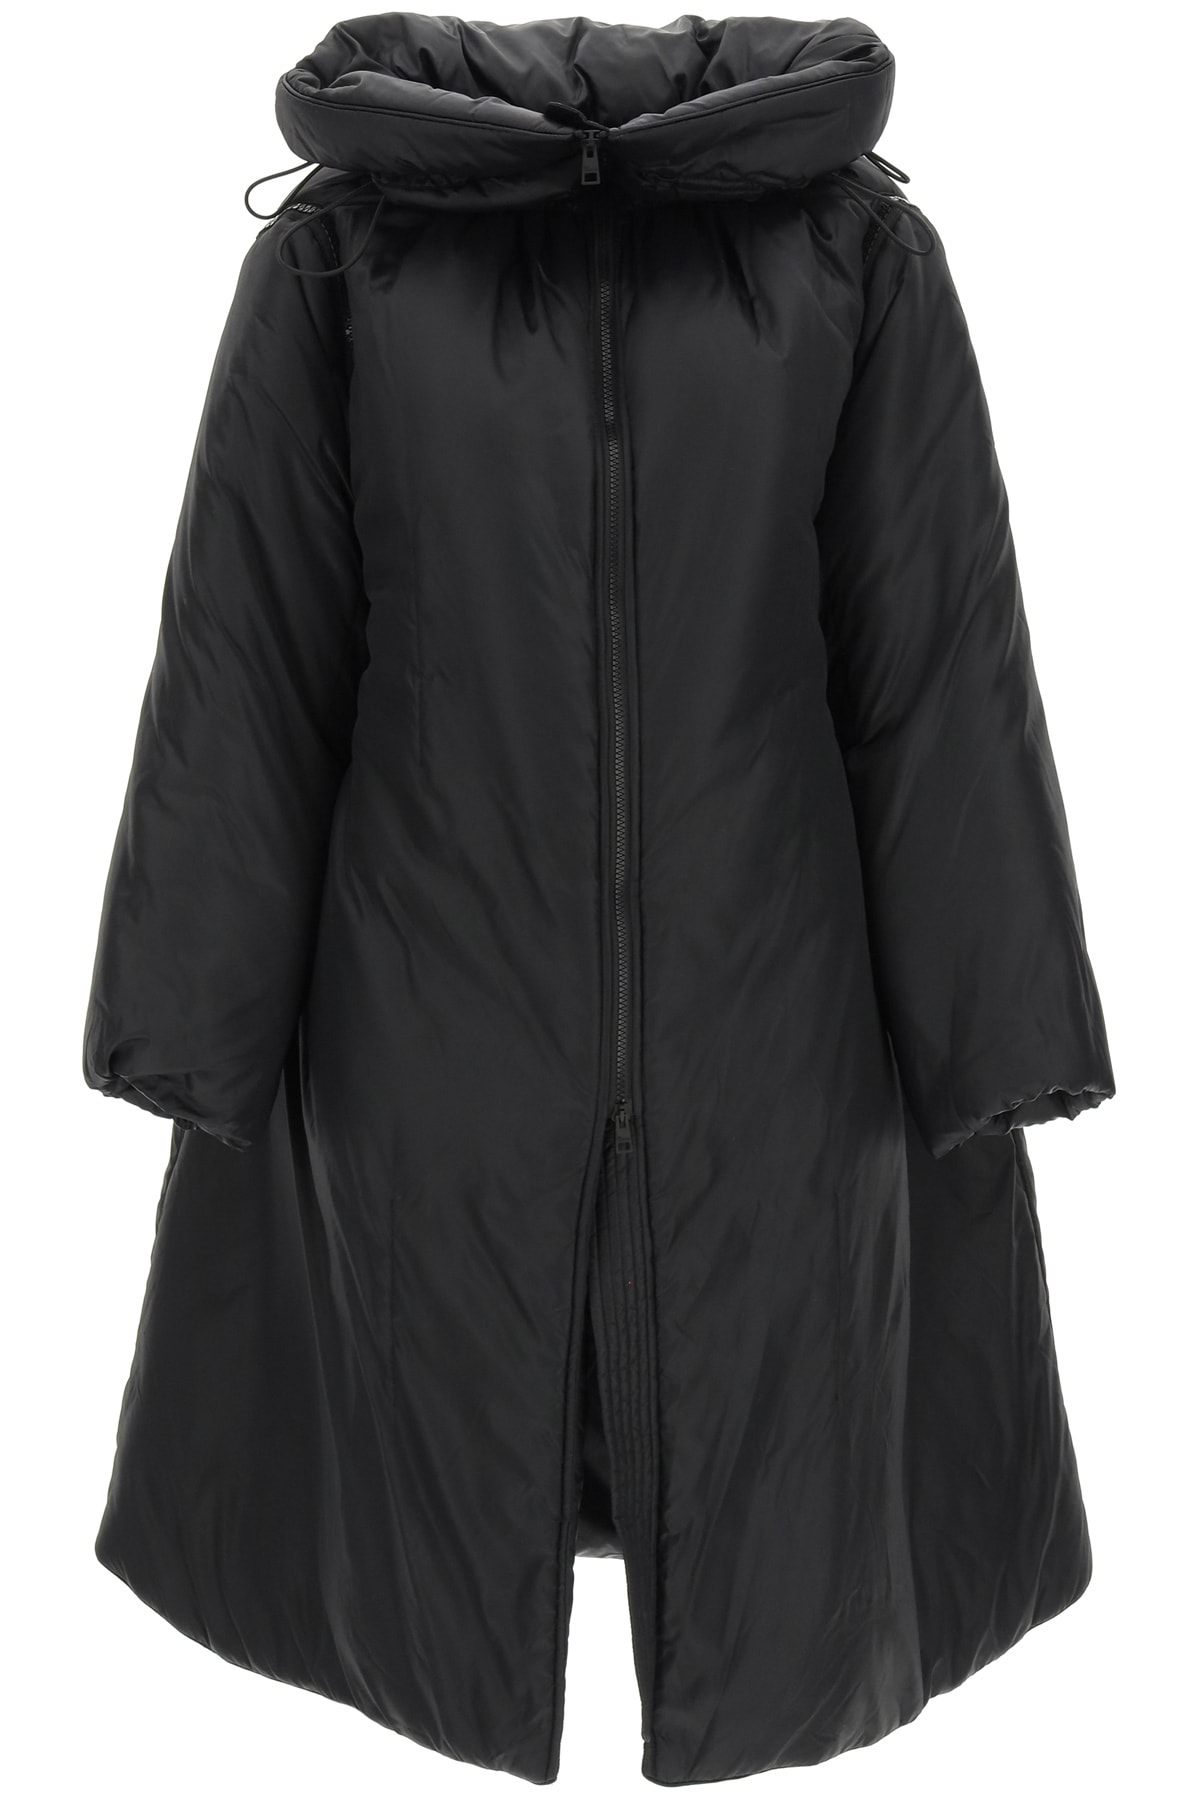 RED Valentino Oversized Convertible Down Jacket